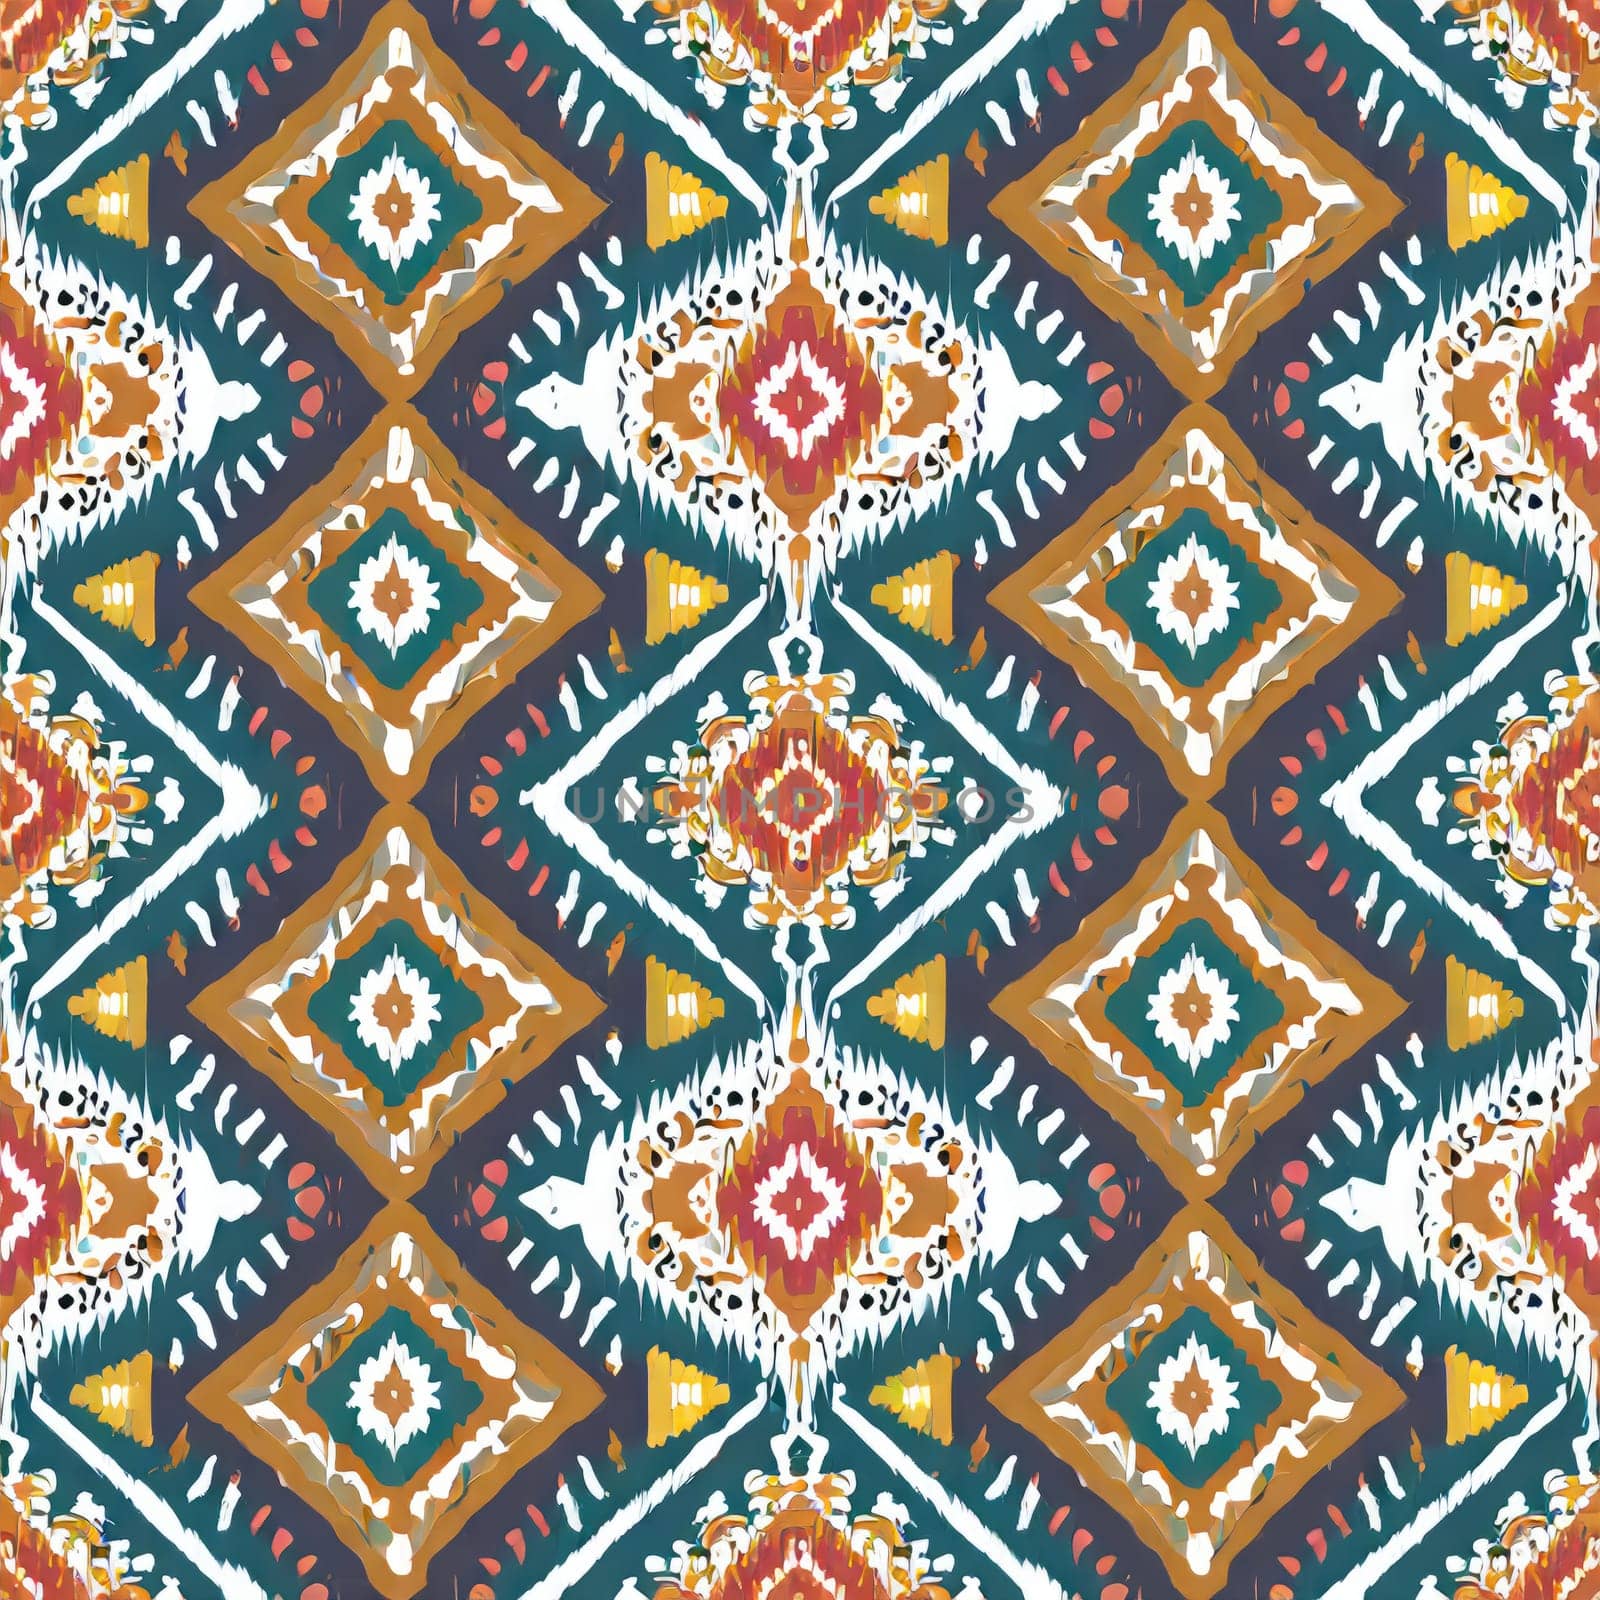 Seamless ikat pattern background elements. Grunge textured textile print and wallpaper, ethnic design by PeaceYAY